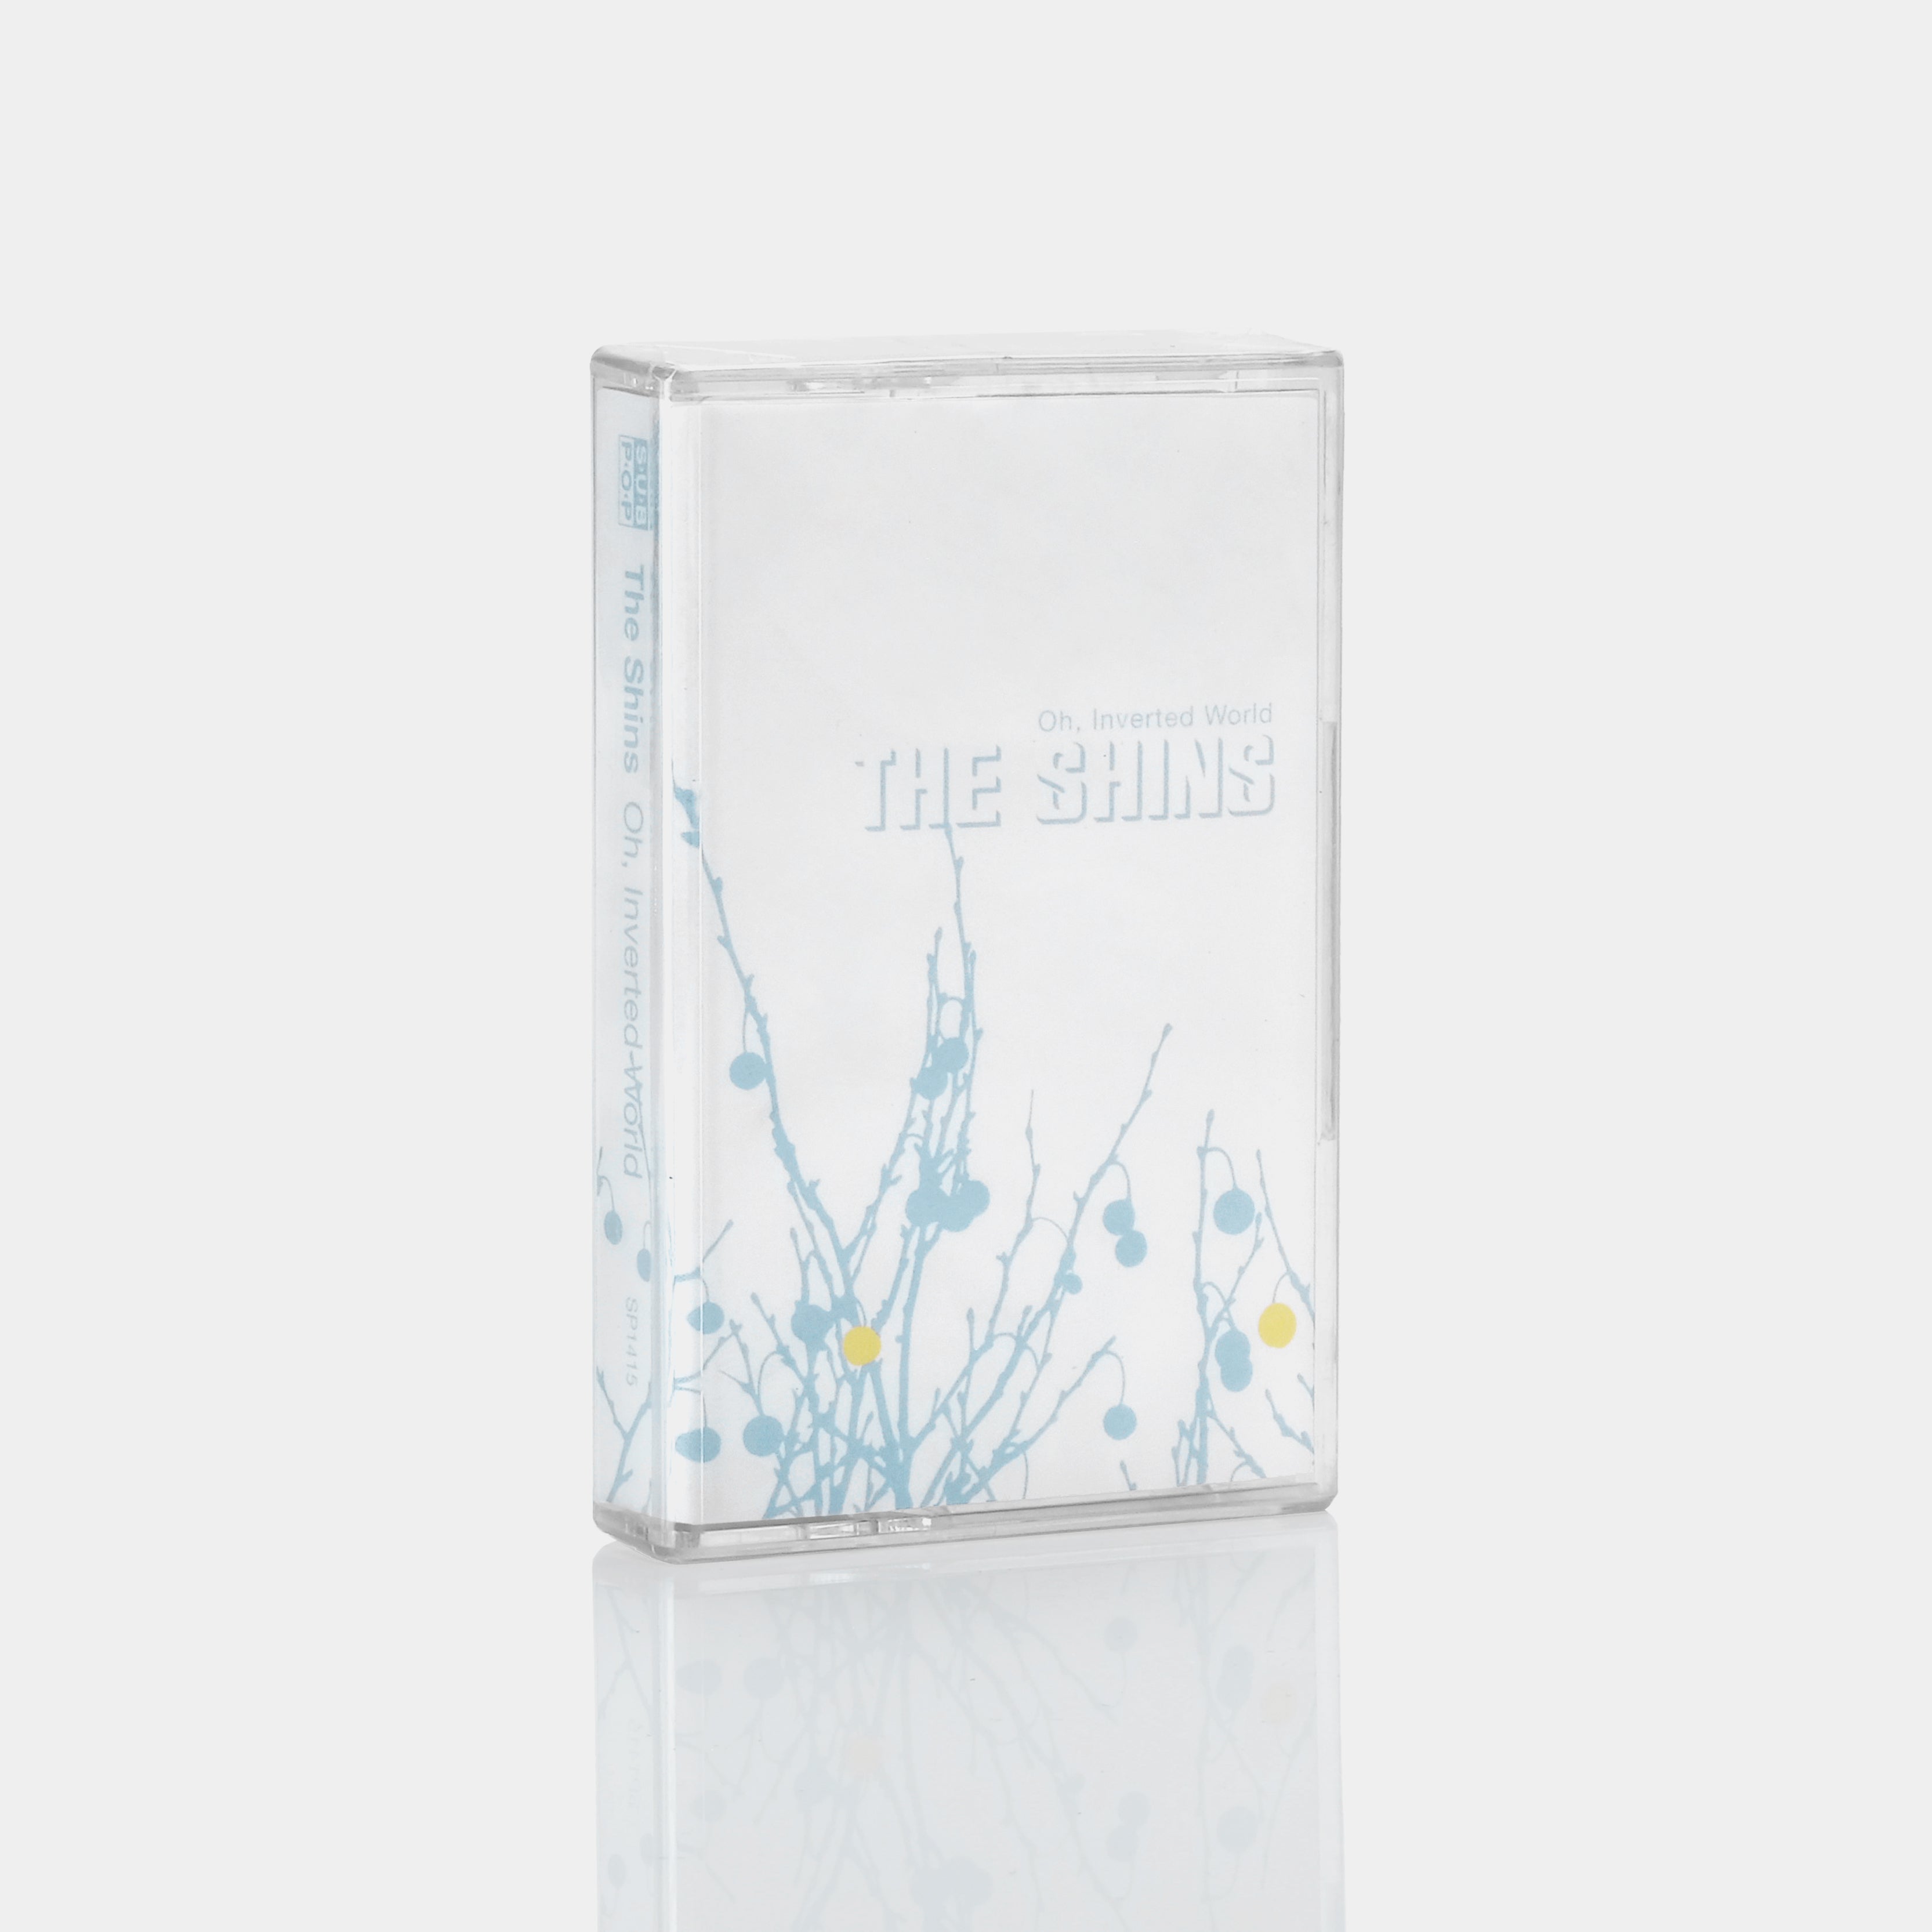 The Shins - Oh, Inverted World (20th Anniversary Edition) Cassette Tape